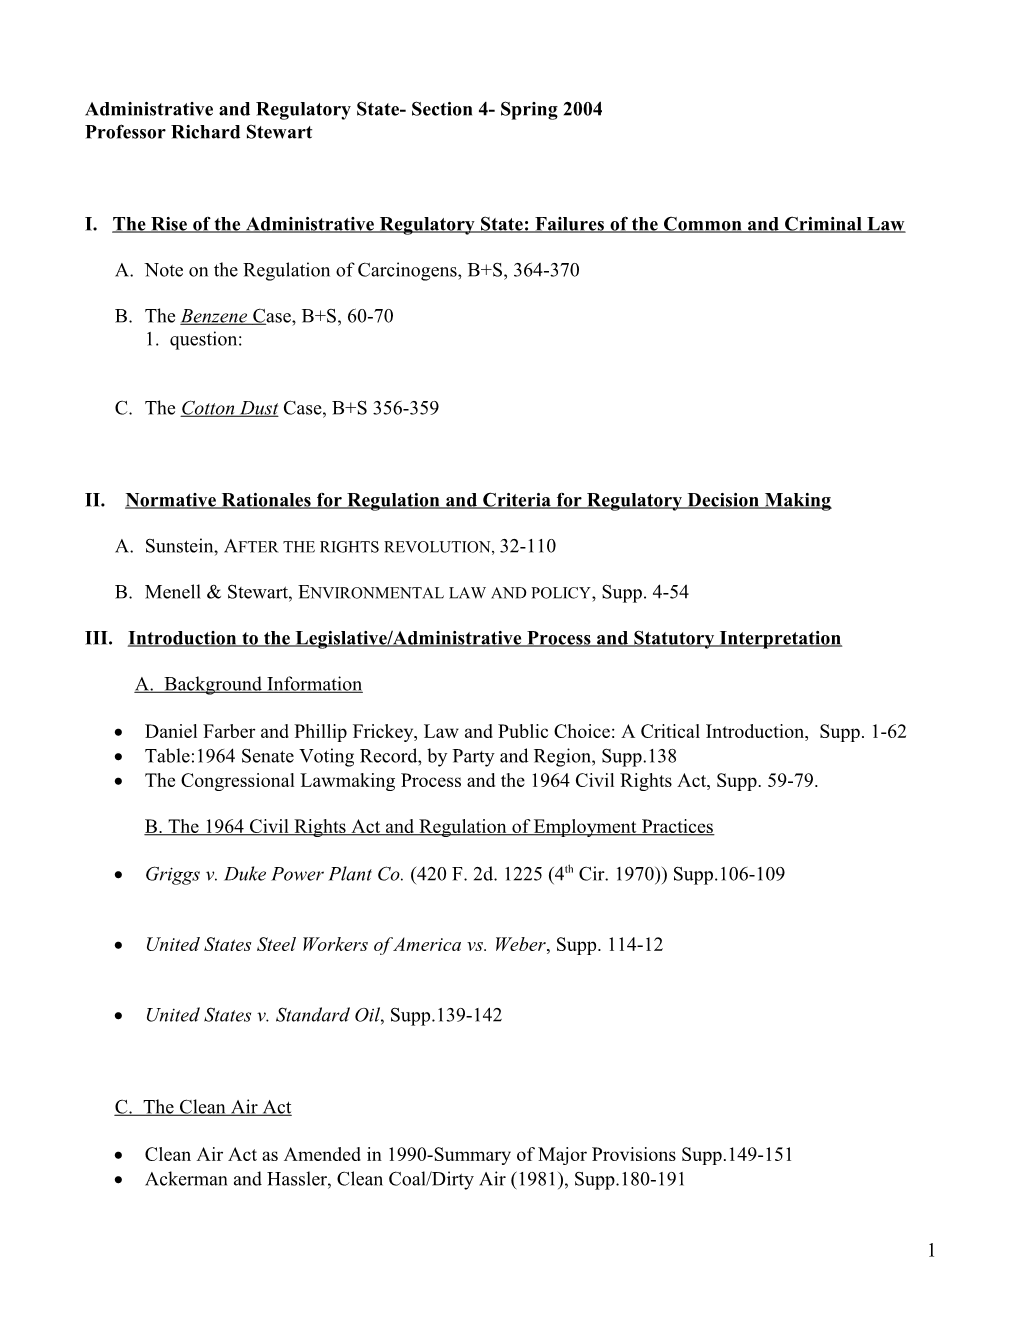 Administrative and Regulatory State- Section 4- Spring 2004